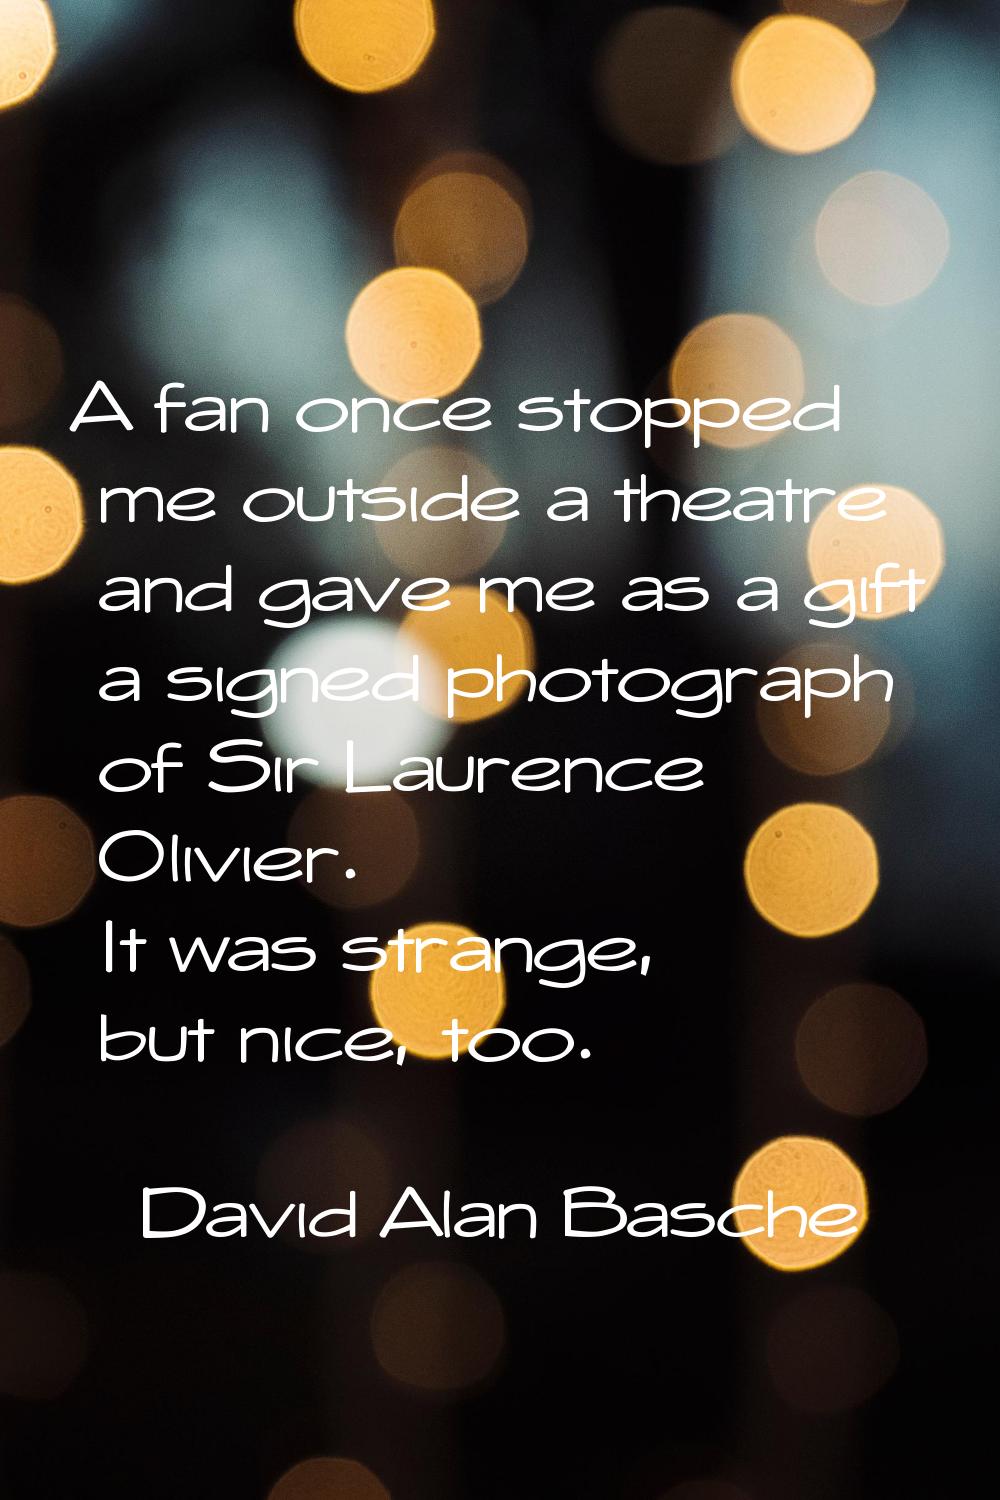 A fan once stopped me outside a theatre and gave me as a gift a signed photograph of Sir Laurence O